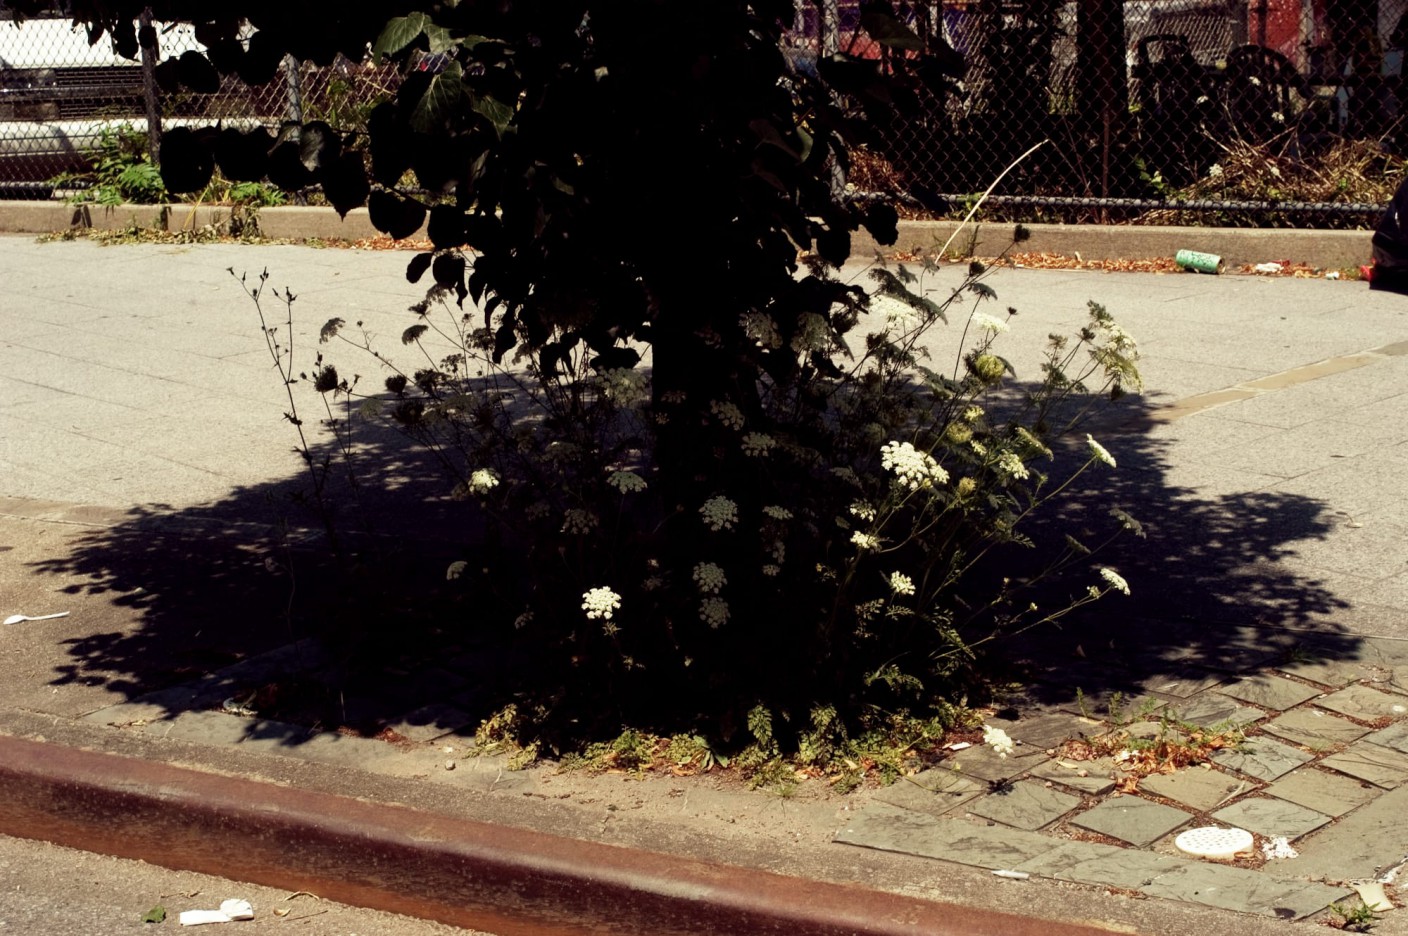 A street tree with a dark shadow casting on itself and small white flowers at the base